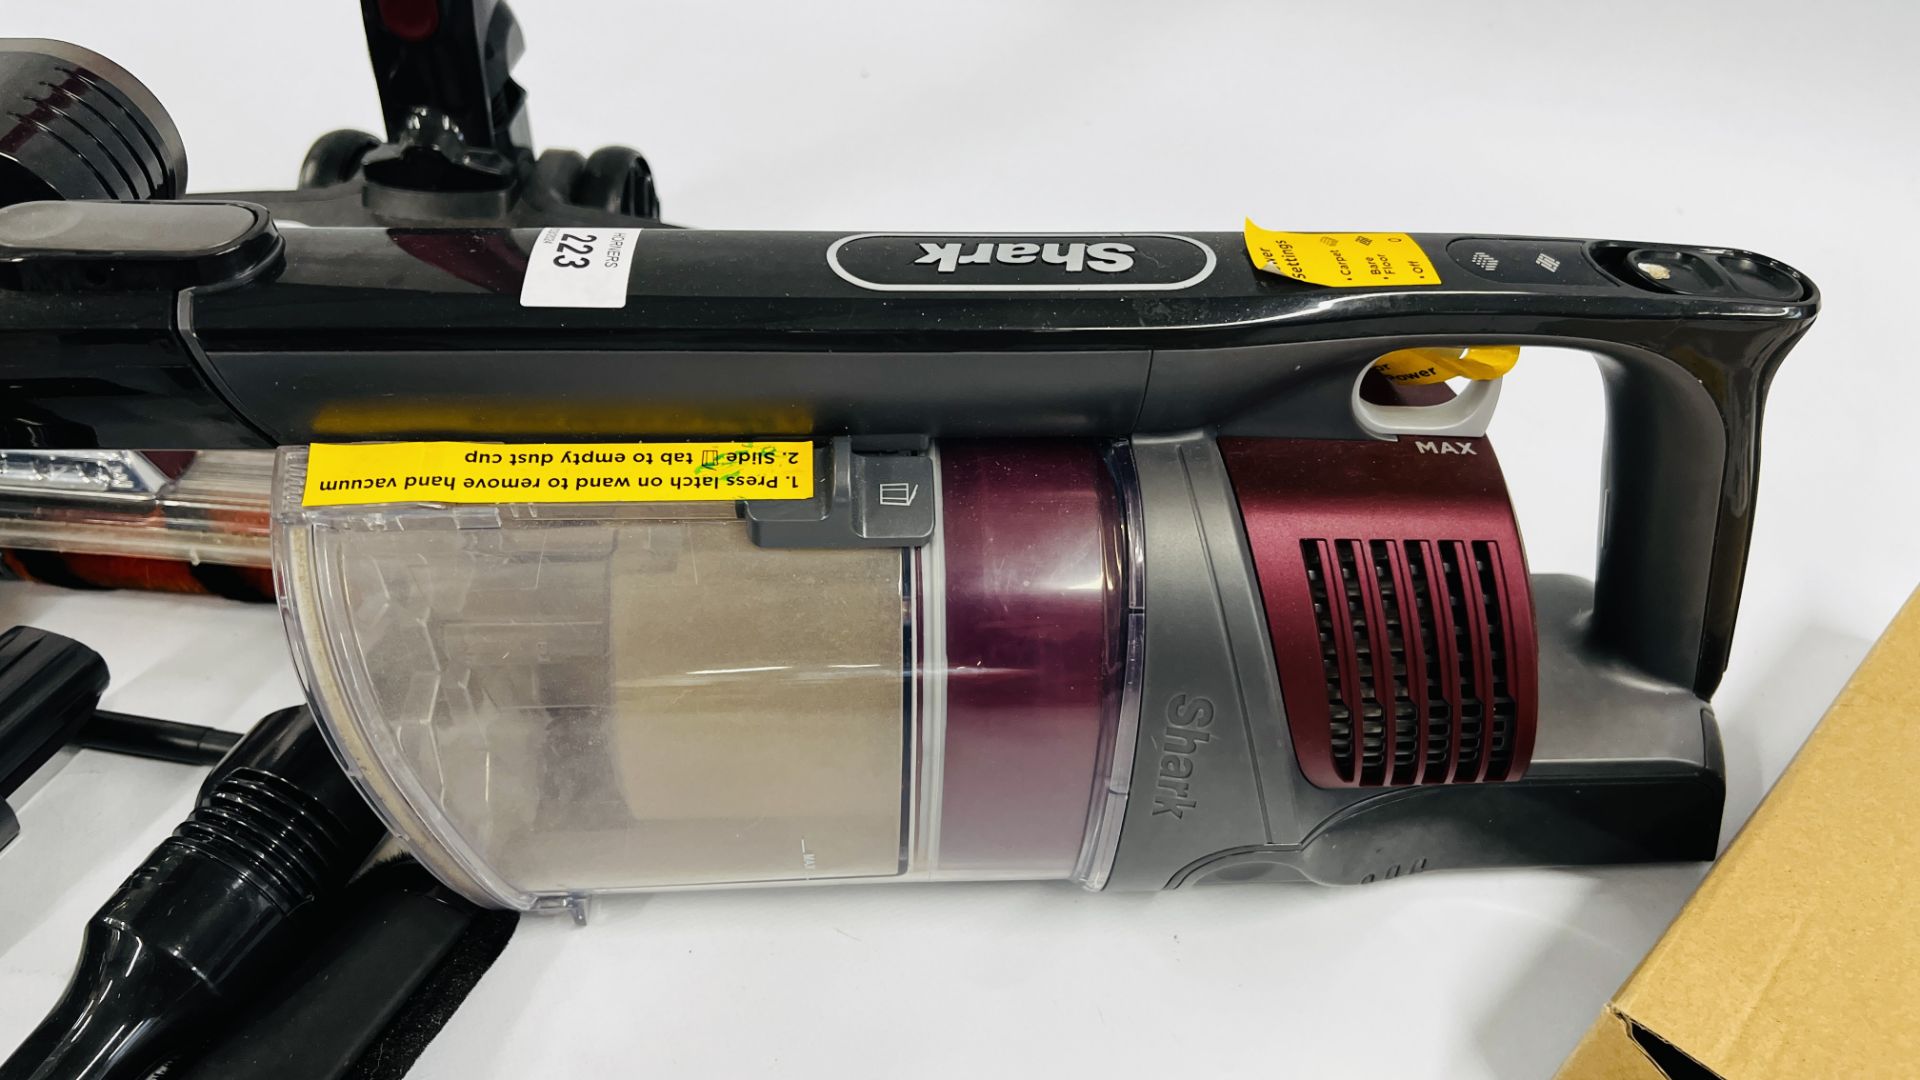 SHARK DUO CLEAN CORDLESS VACUUM CLEANER WITH CHARGER, BATTERIES & ACCESSORIES - SOLD AS SEEN. - Image 7 of 8